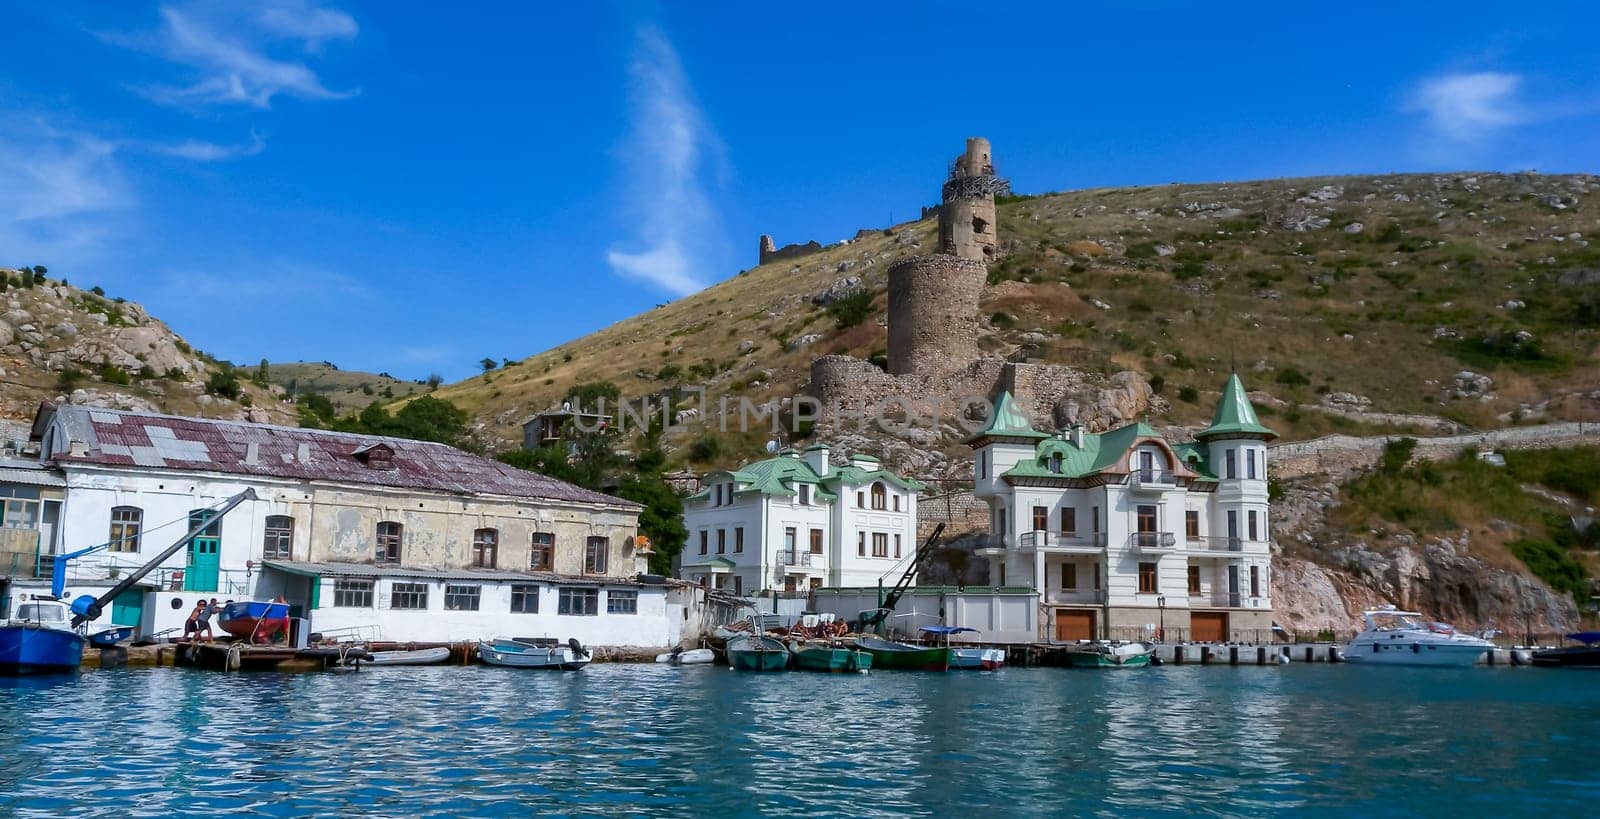 BALAKLAVA, UKRAINE - JUNE 27, 2012: View from the sea to the ruins of the fortress and modern buildings on the shore in Balaklava Bay, Black Sea by Hydrobiolog